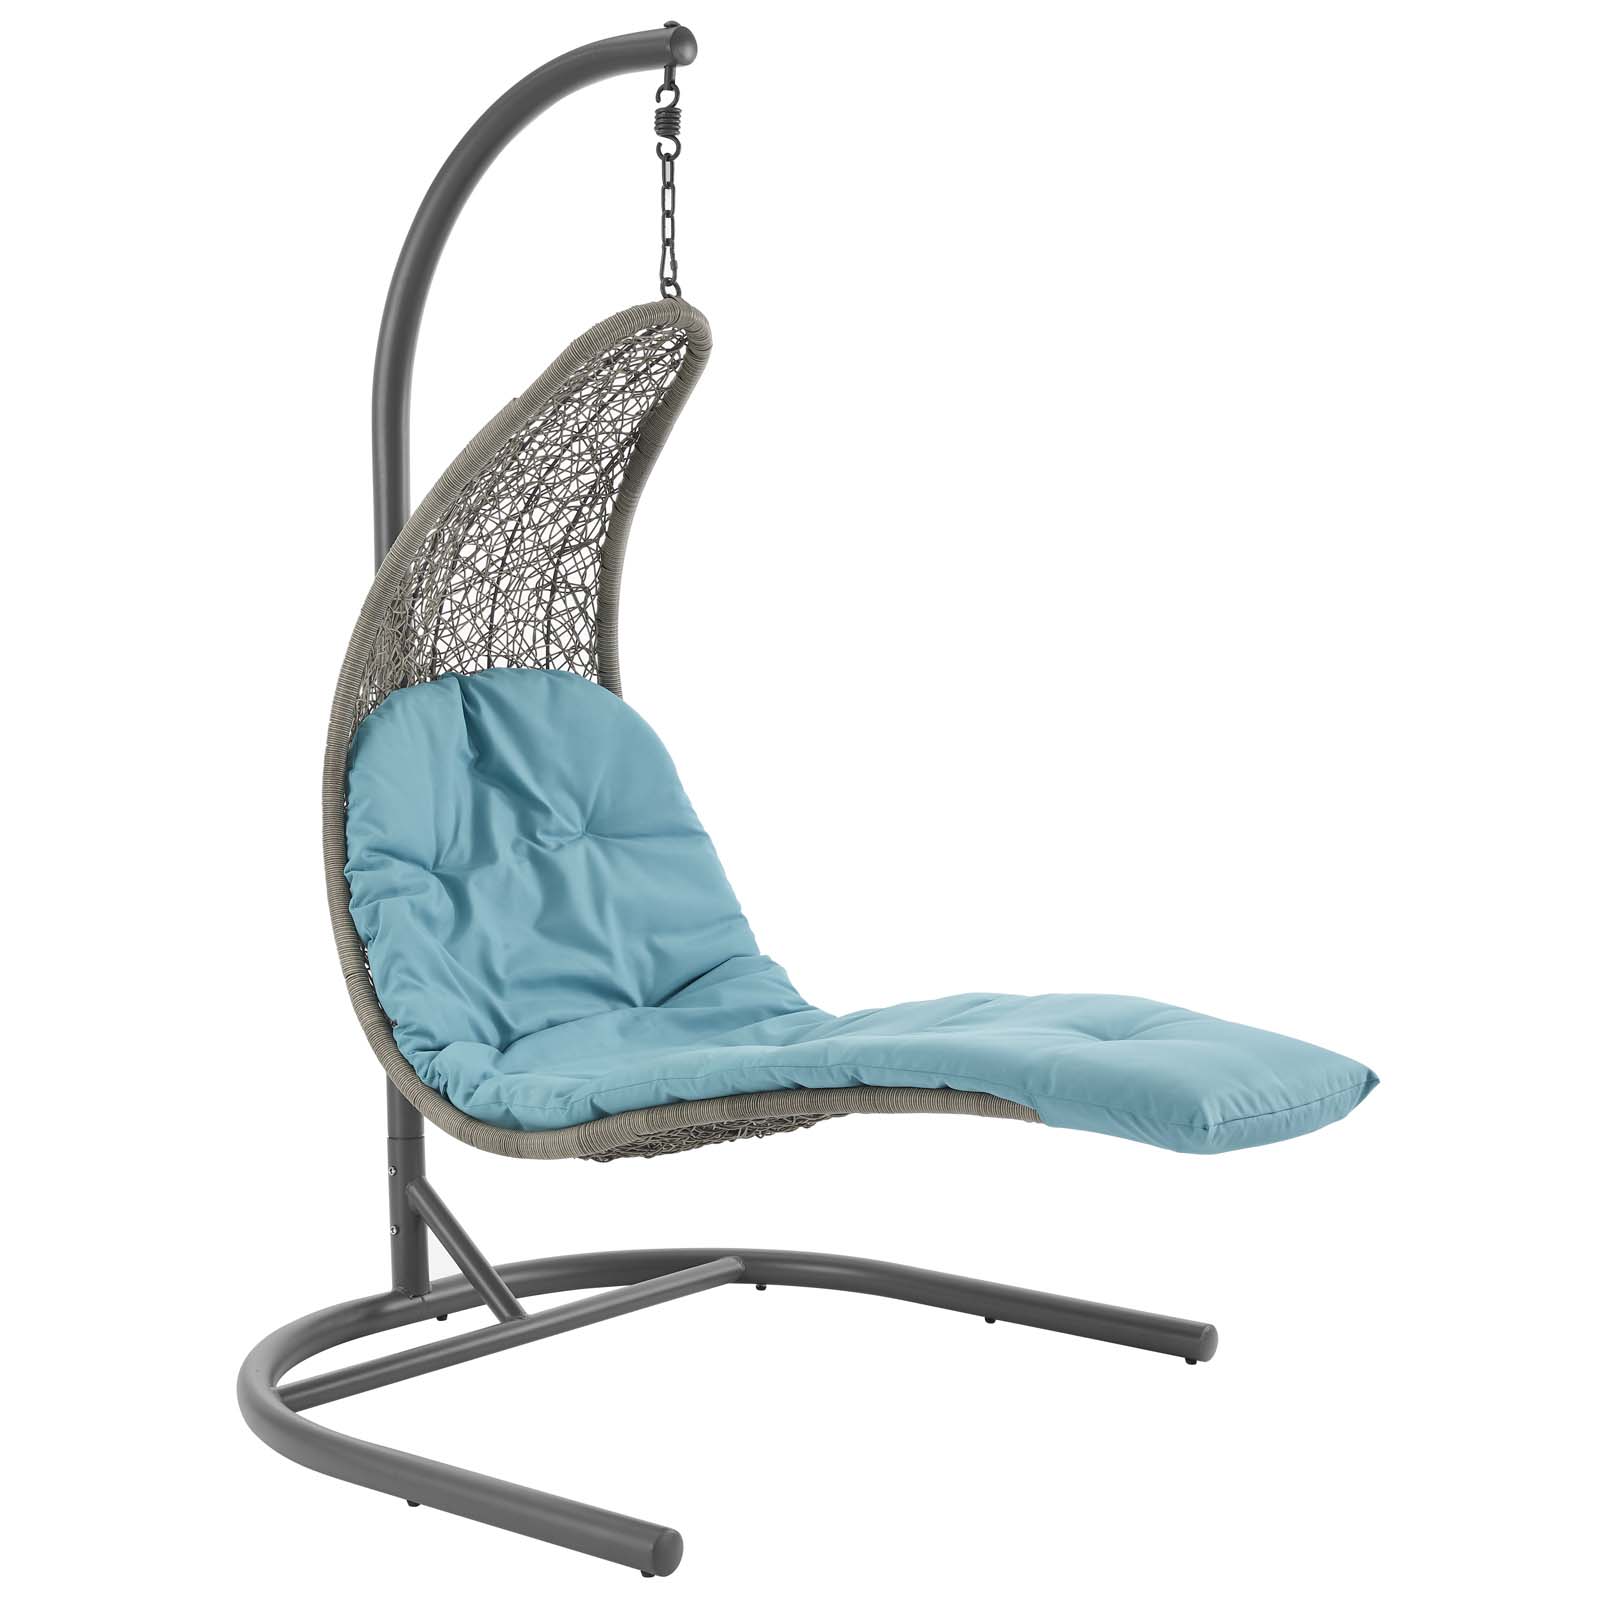 Modway Landscape Outdoor Patio Hanging Chaise Lounge Swing Chair, Multiple Colors - image 3 of 6